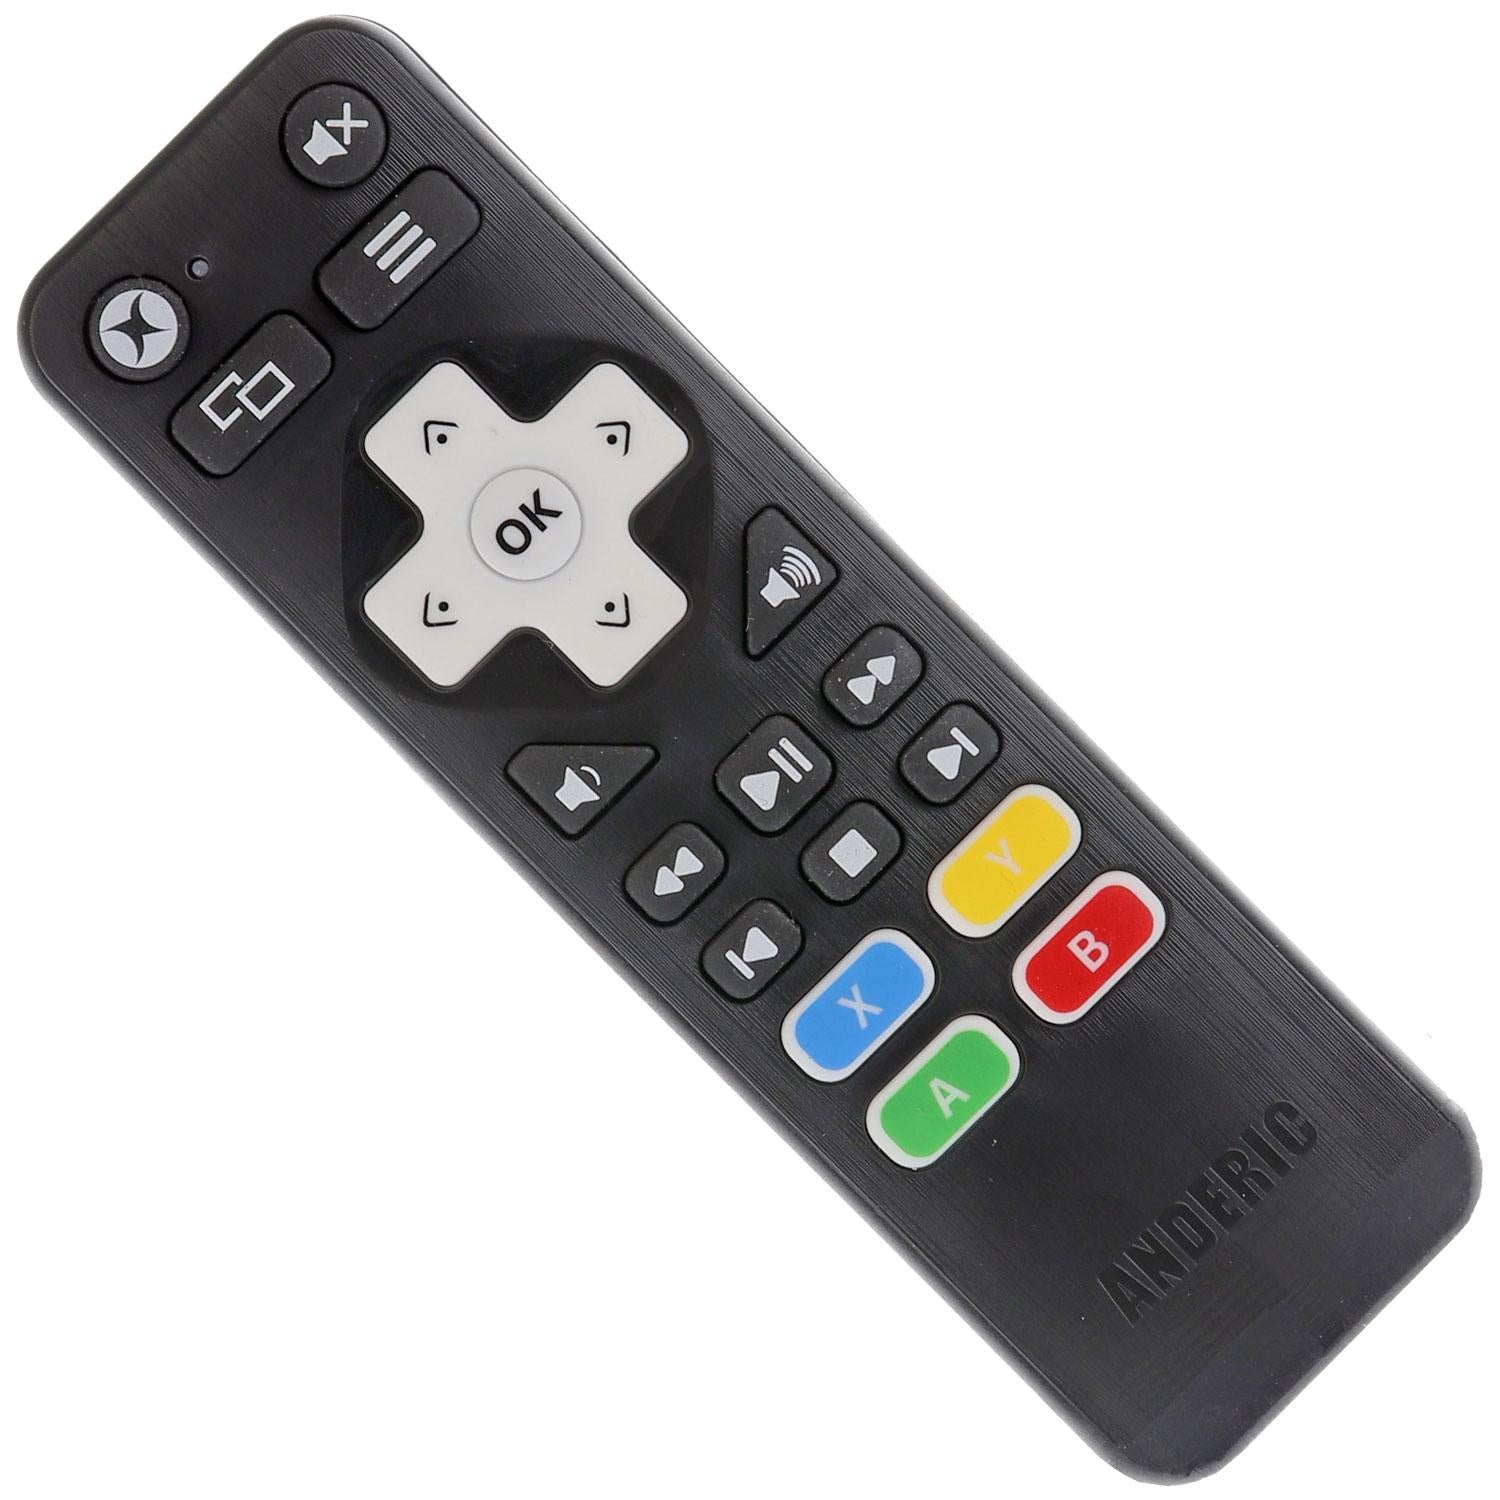 RRXB01 Media Remote Control for Xbox One®, Xbox One S®, Xbox One X® Game Consoles with Learning Functionality